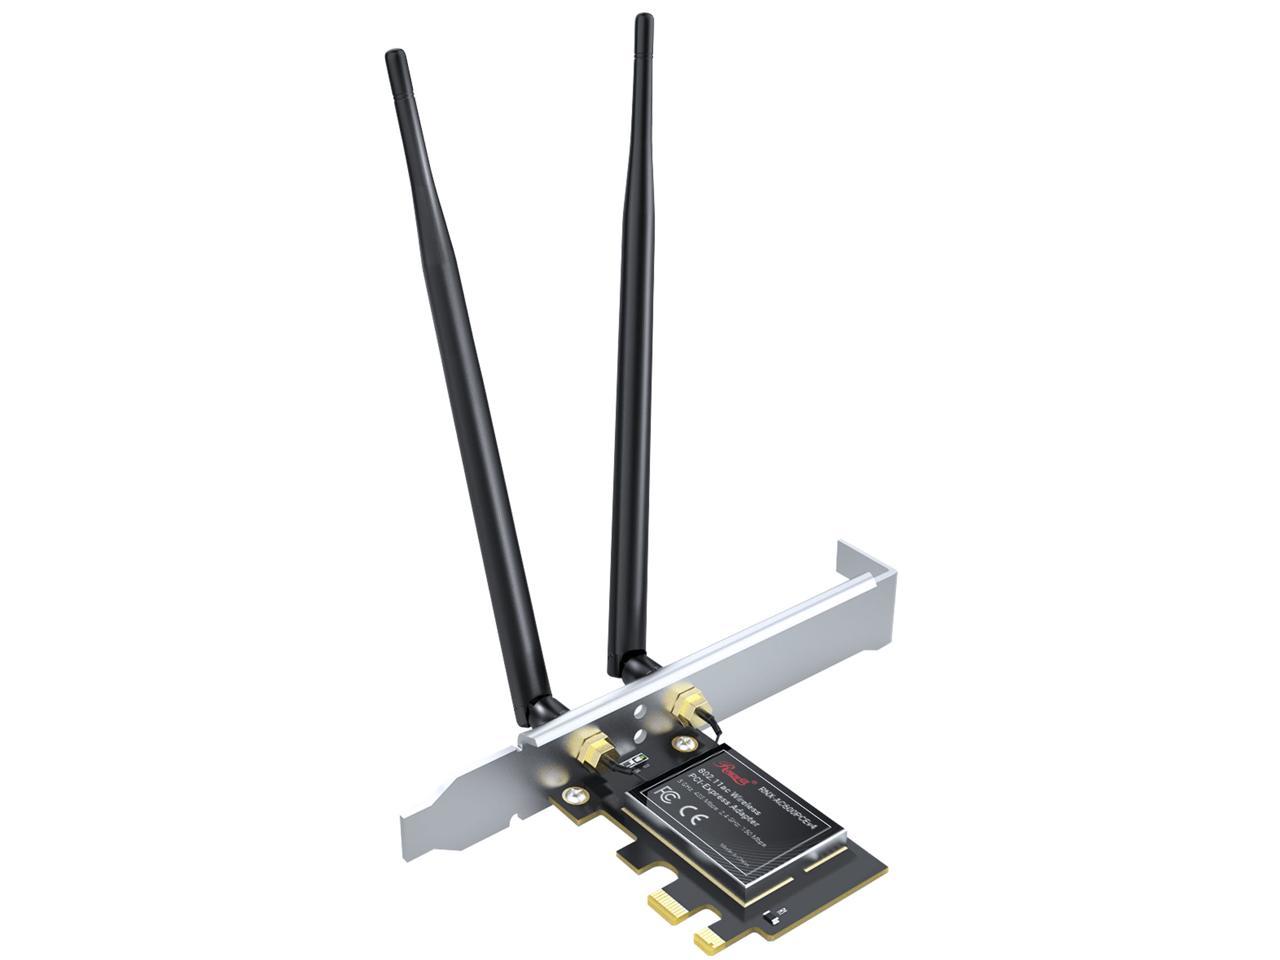 Rosewill PCI Express Wireless Dual Band Adapter $10 + Free shipping